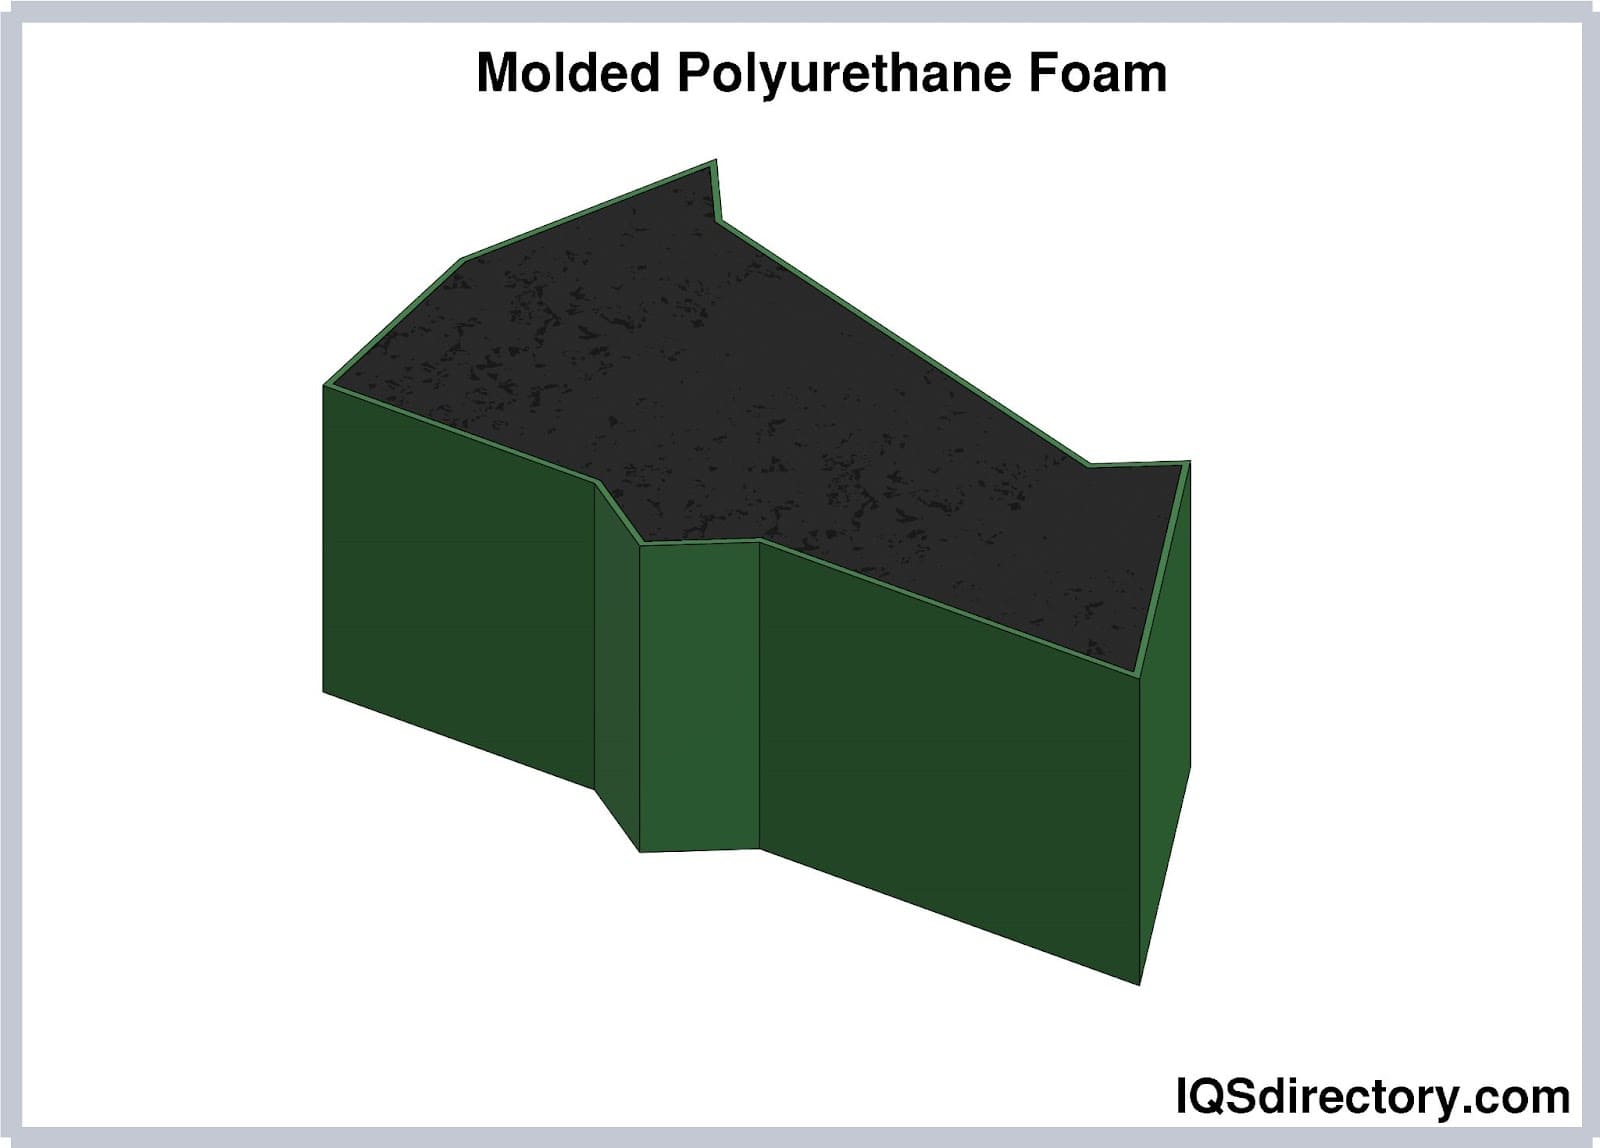 Polyurethane Molding: What Is It? How Does It Work? Uses, Types Of